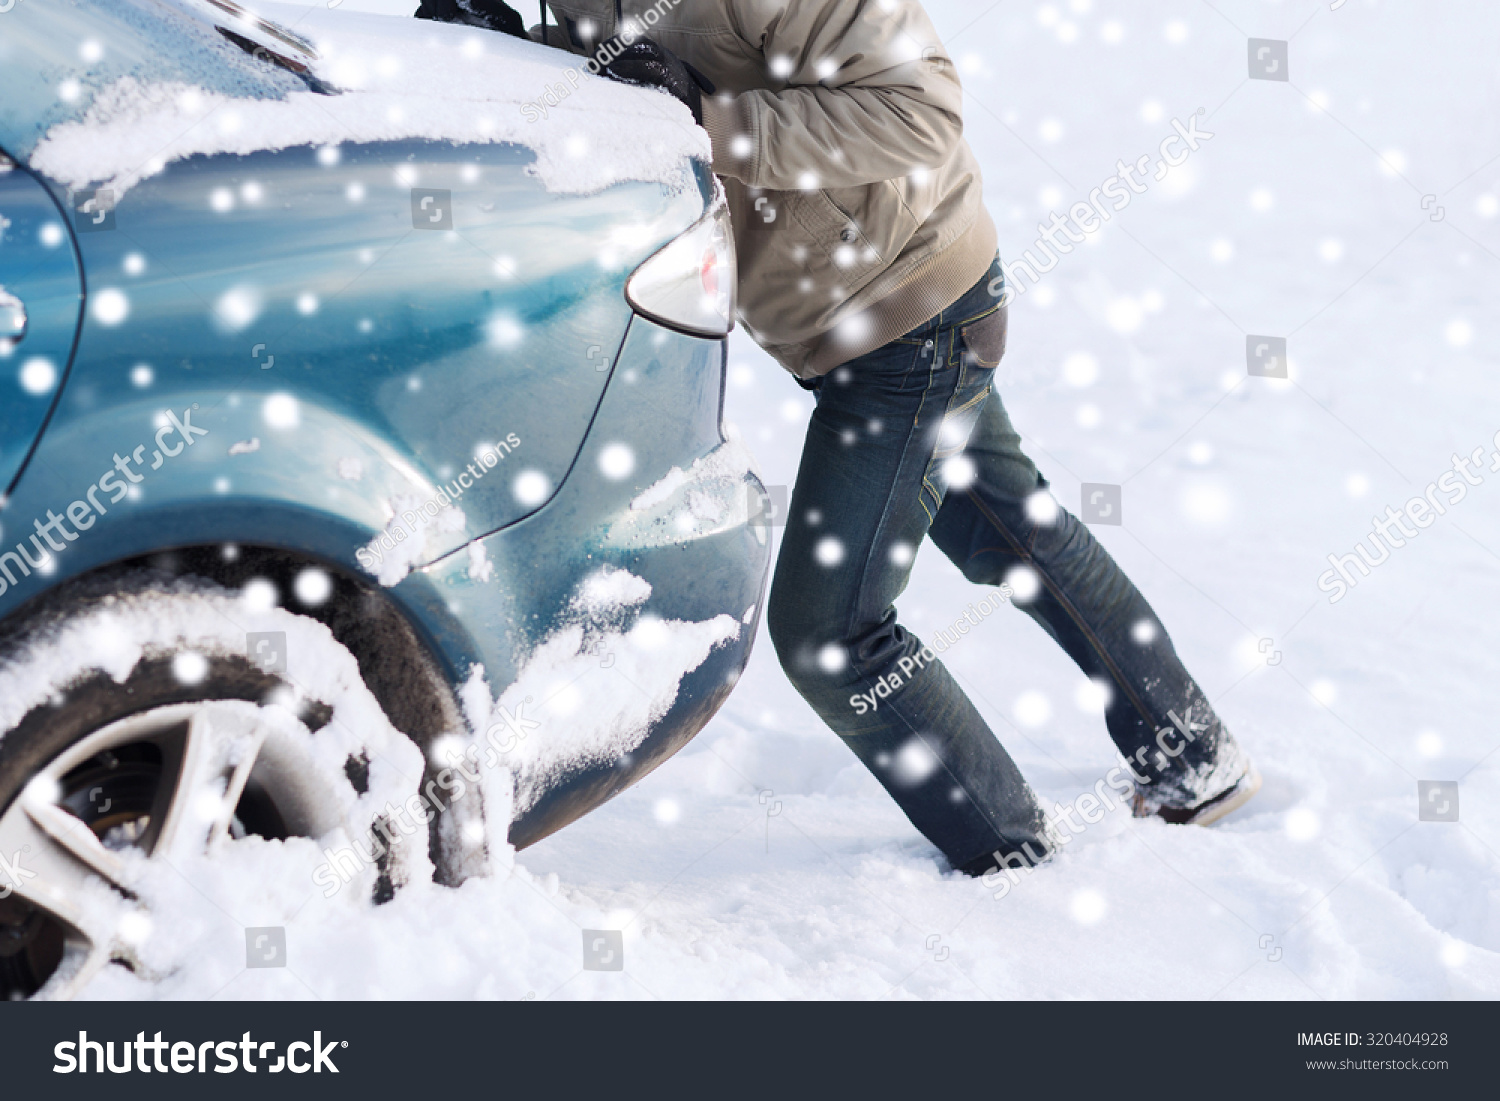 clipart cars in snow - photo #35